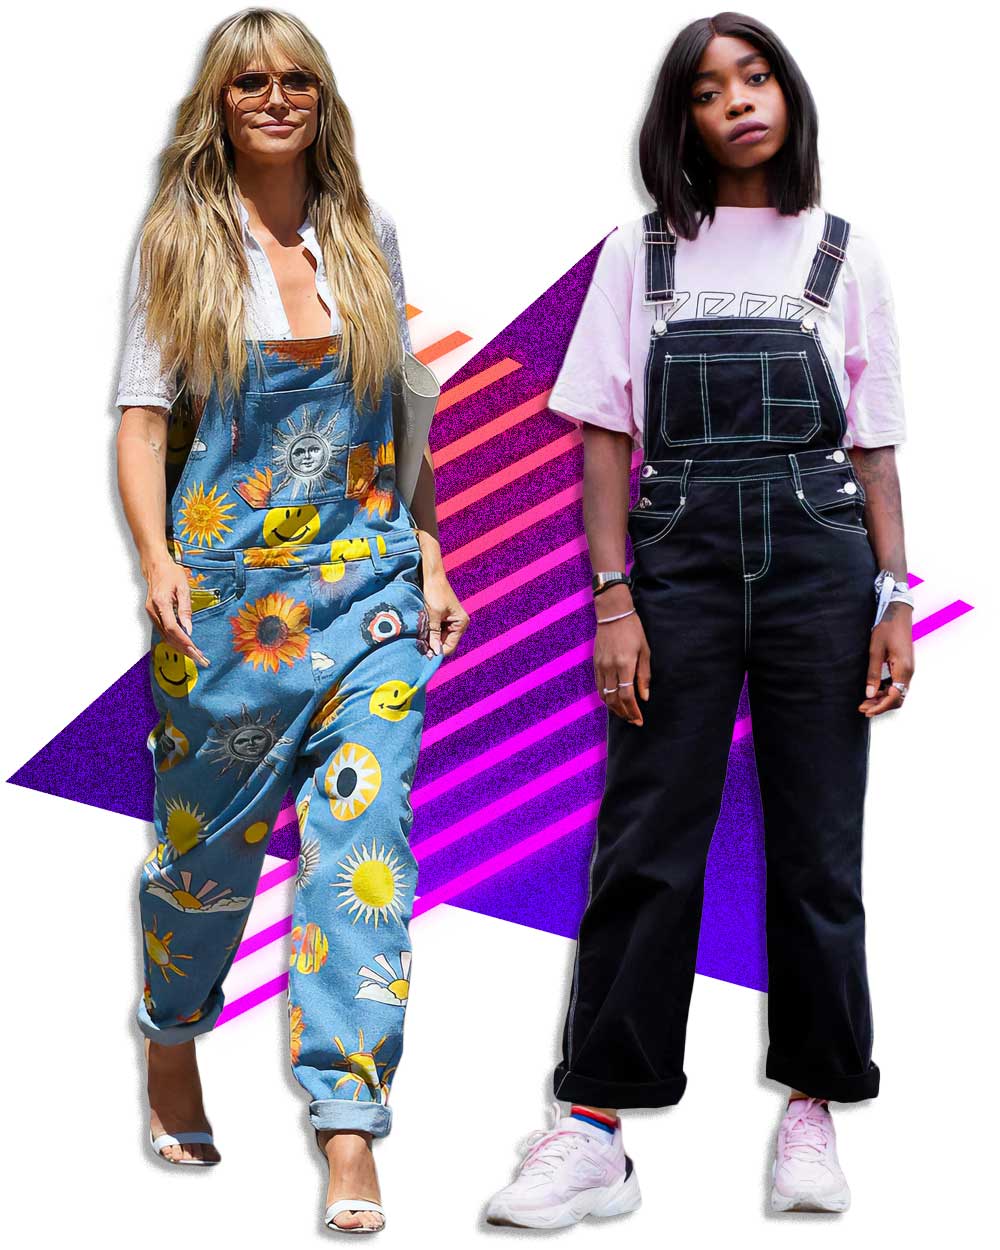 Denim Overalls of the 80s fashion coming back